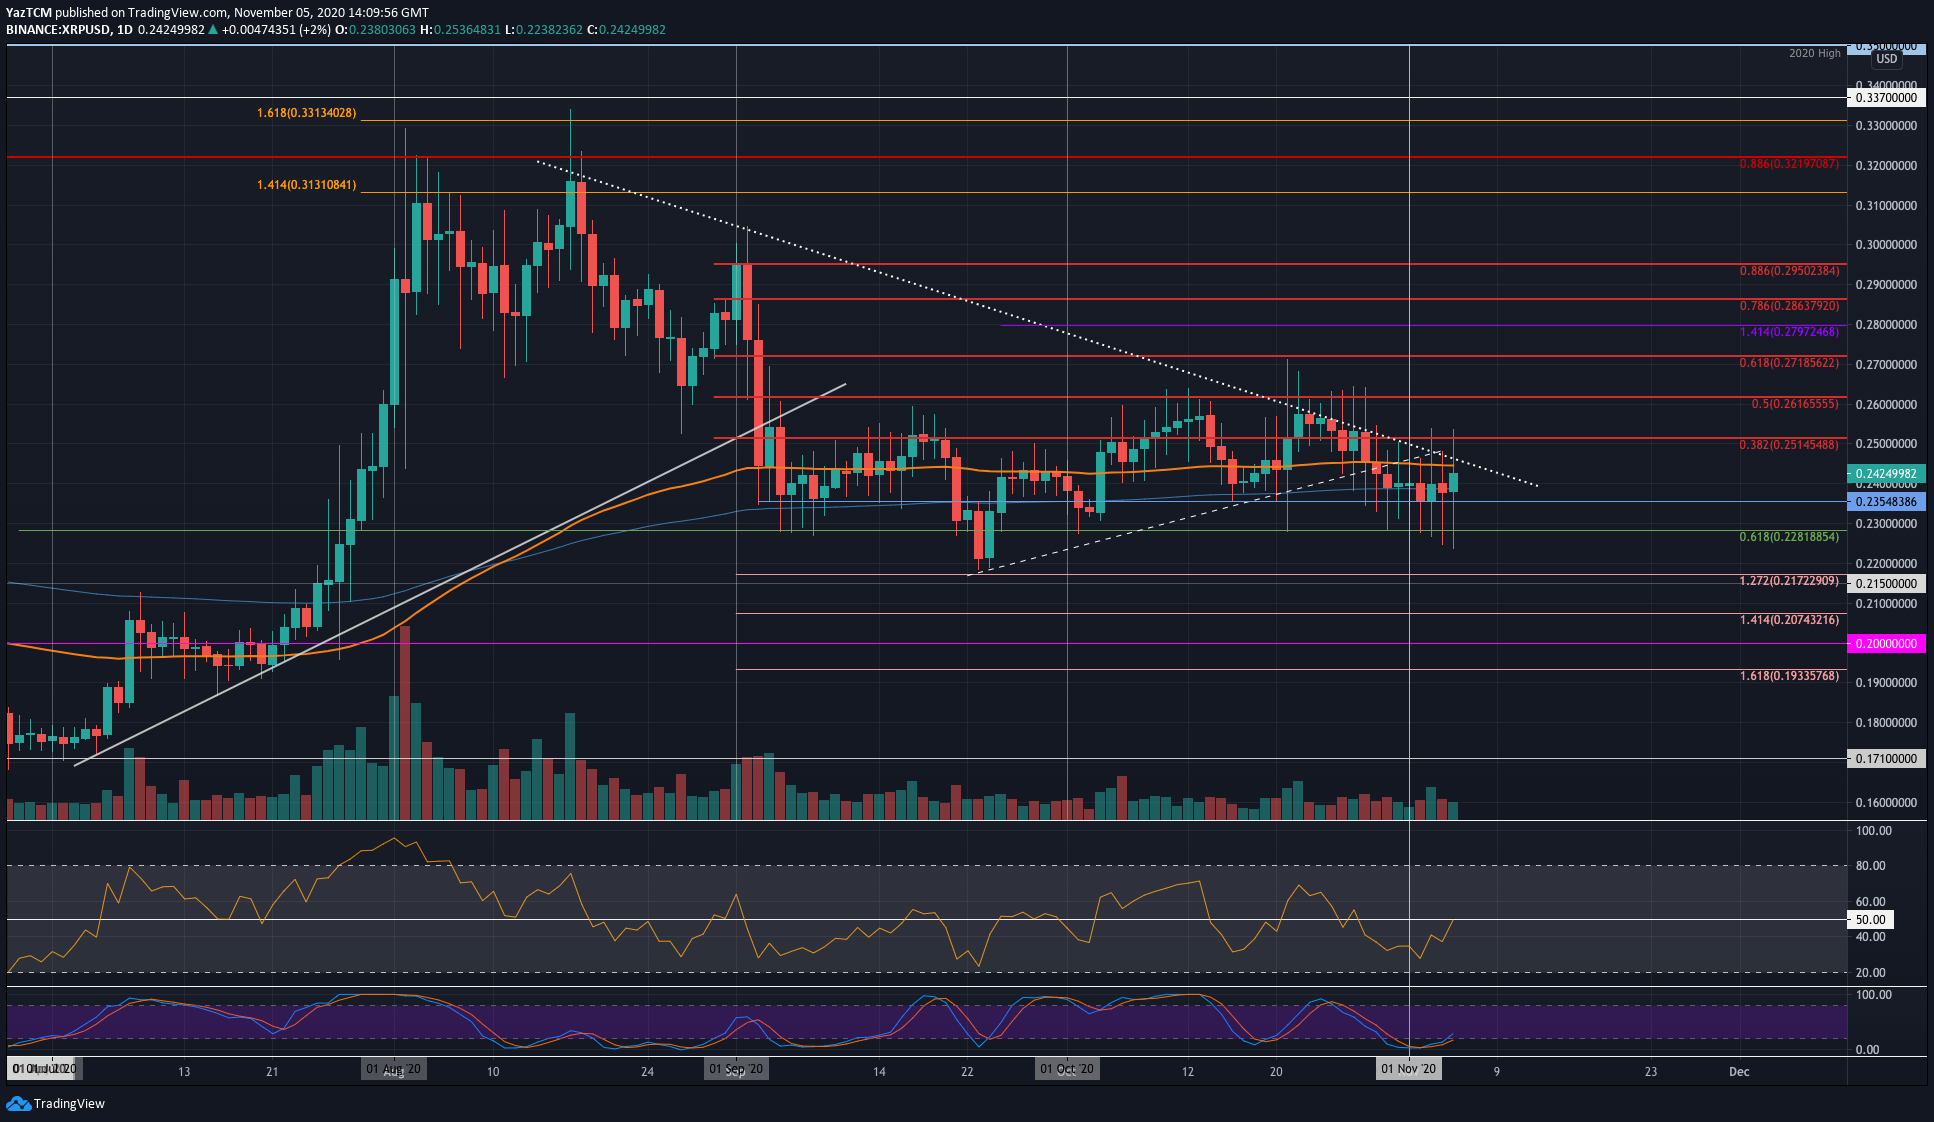 Ripple-price-analysis:-despite-the-bitcoin-rally,-xrp-is-struggling-below-$0.25